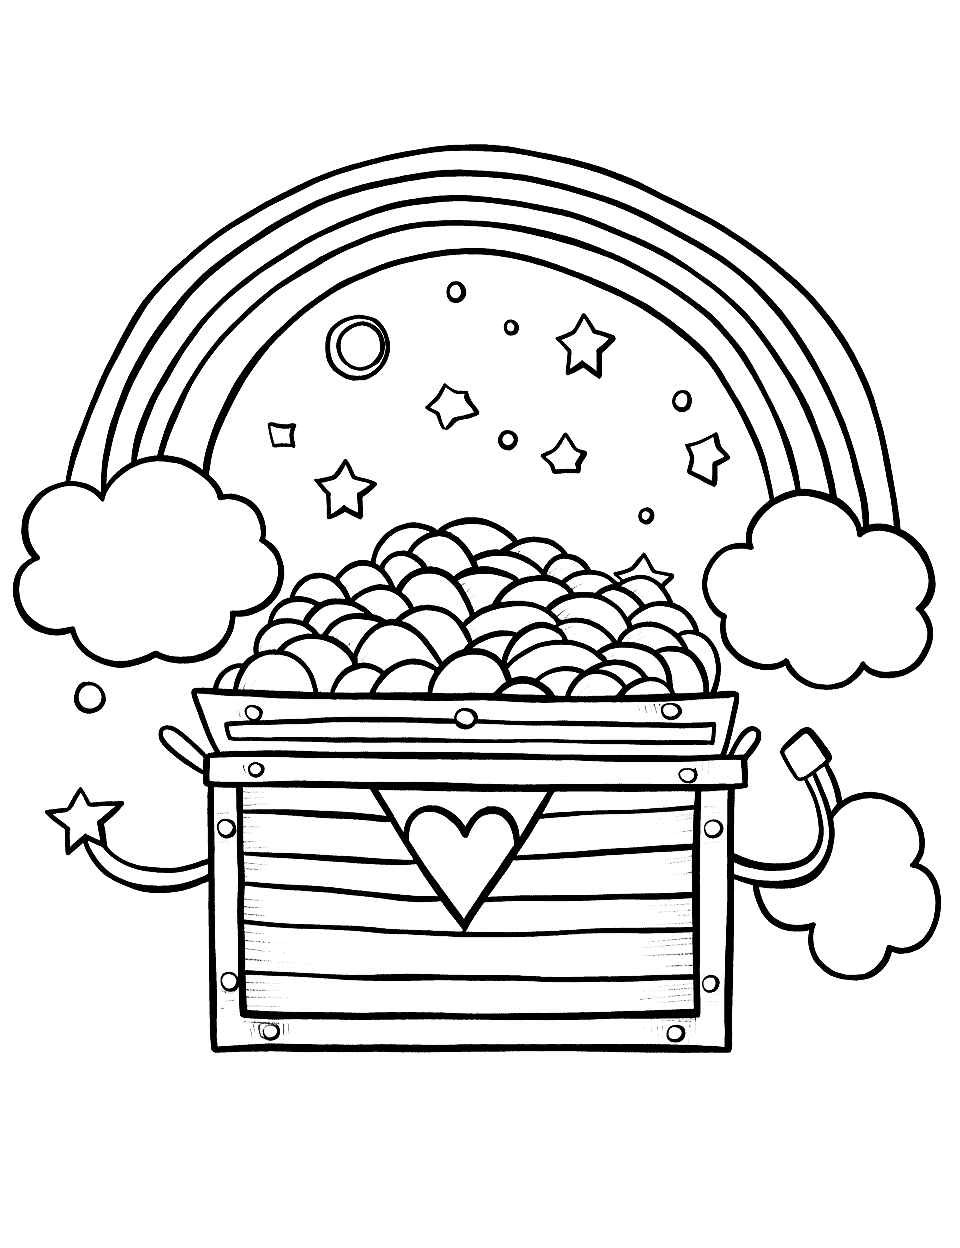 Rainbow Gems Coloring Page - A treasure chest overflowing with gems of all the colors of the rainbow.